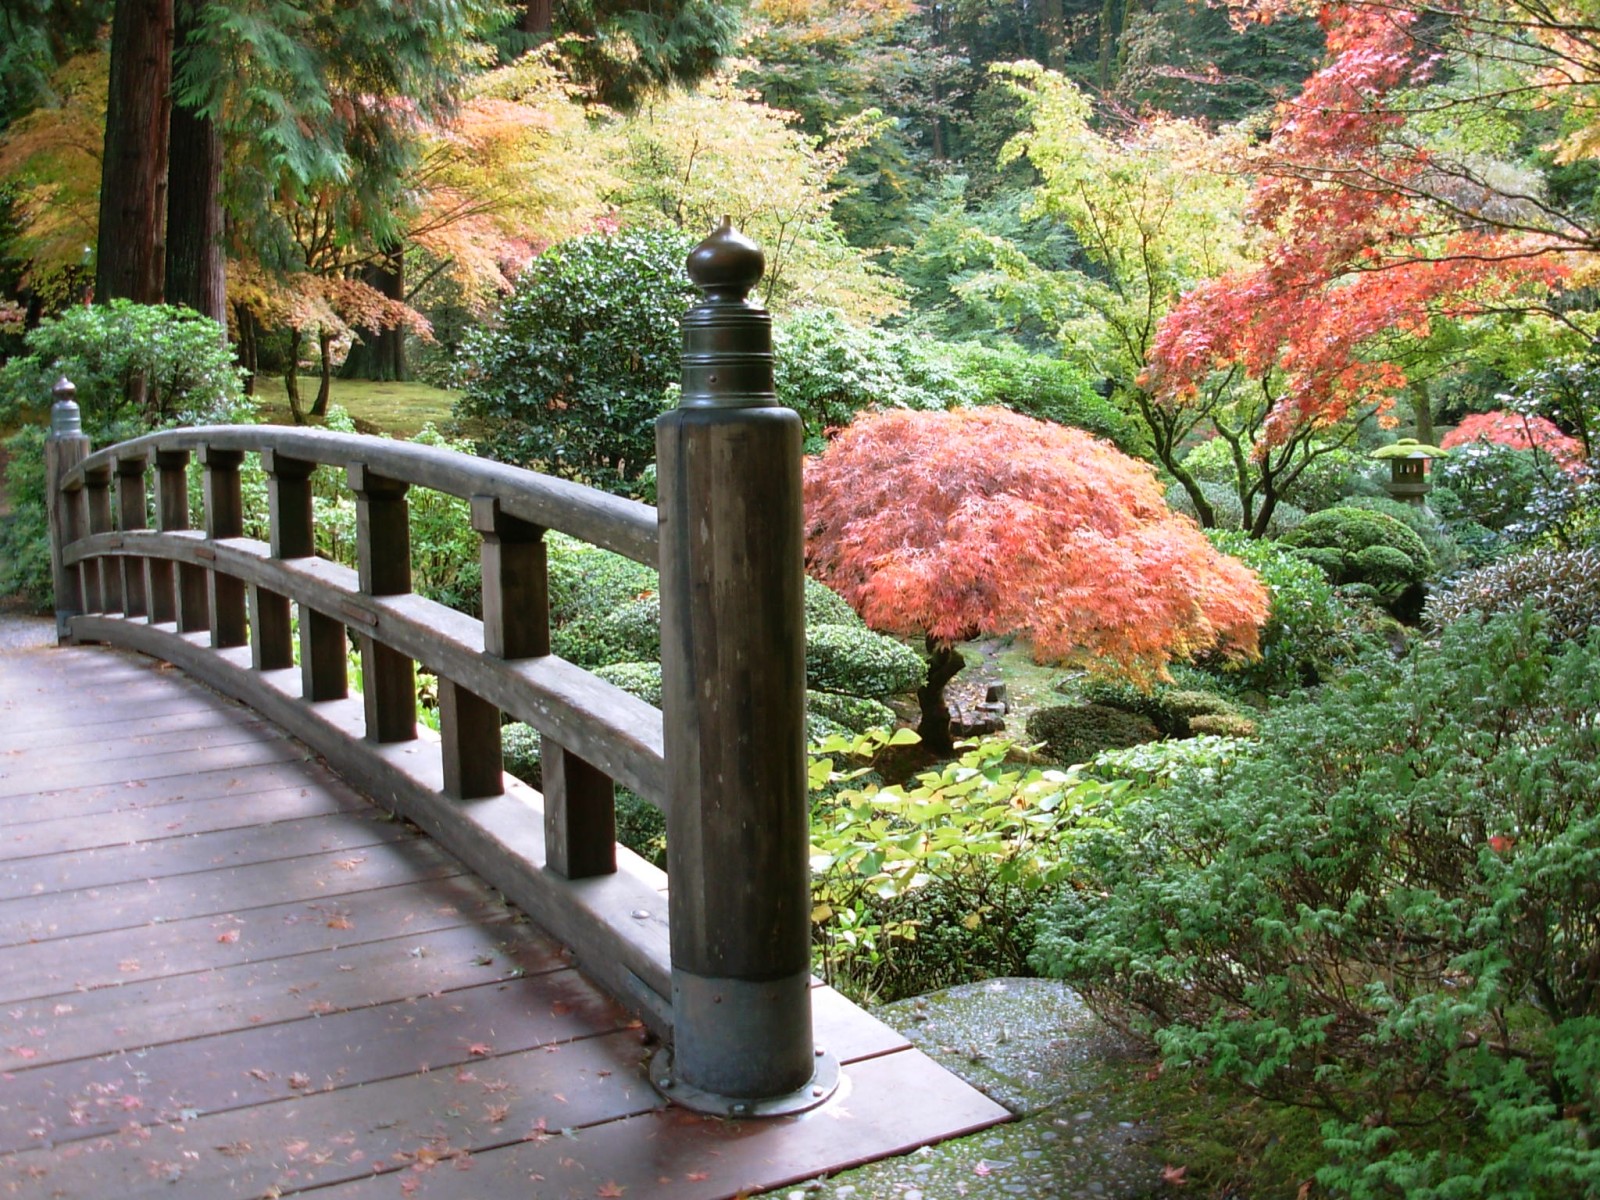 Green Japanese garden with a tree